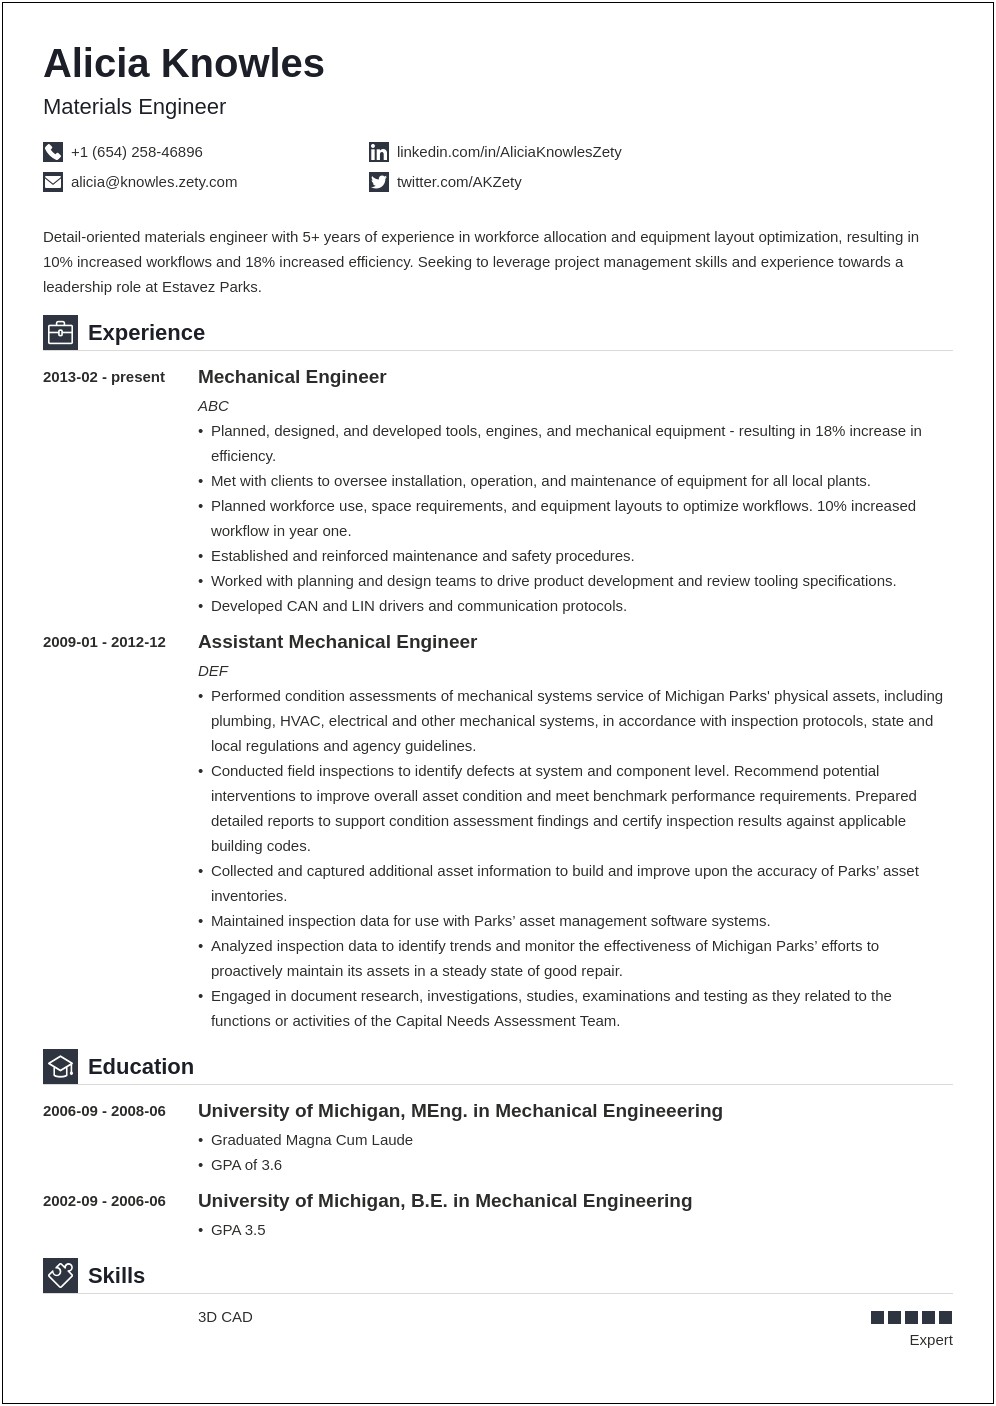 Cant Fit All Relevant Work Experioence Onto Resume